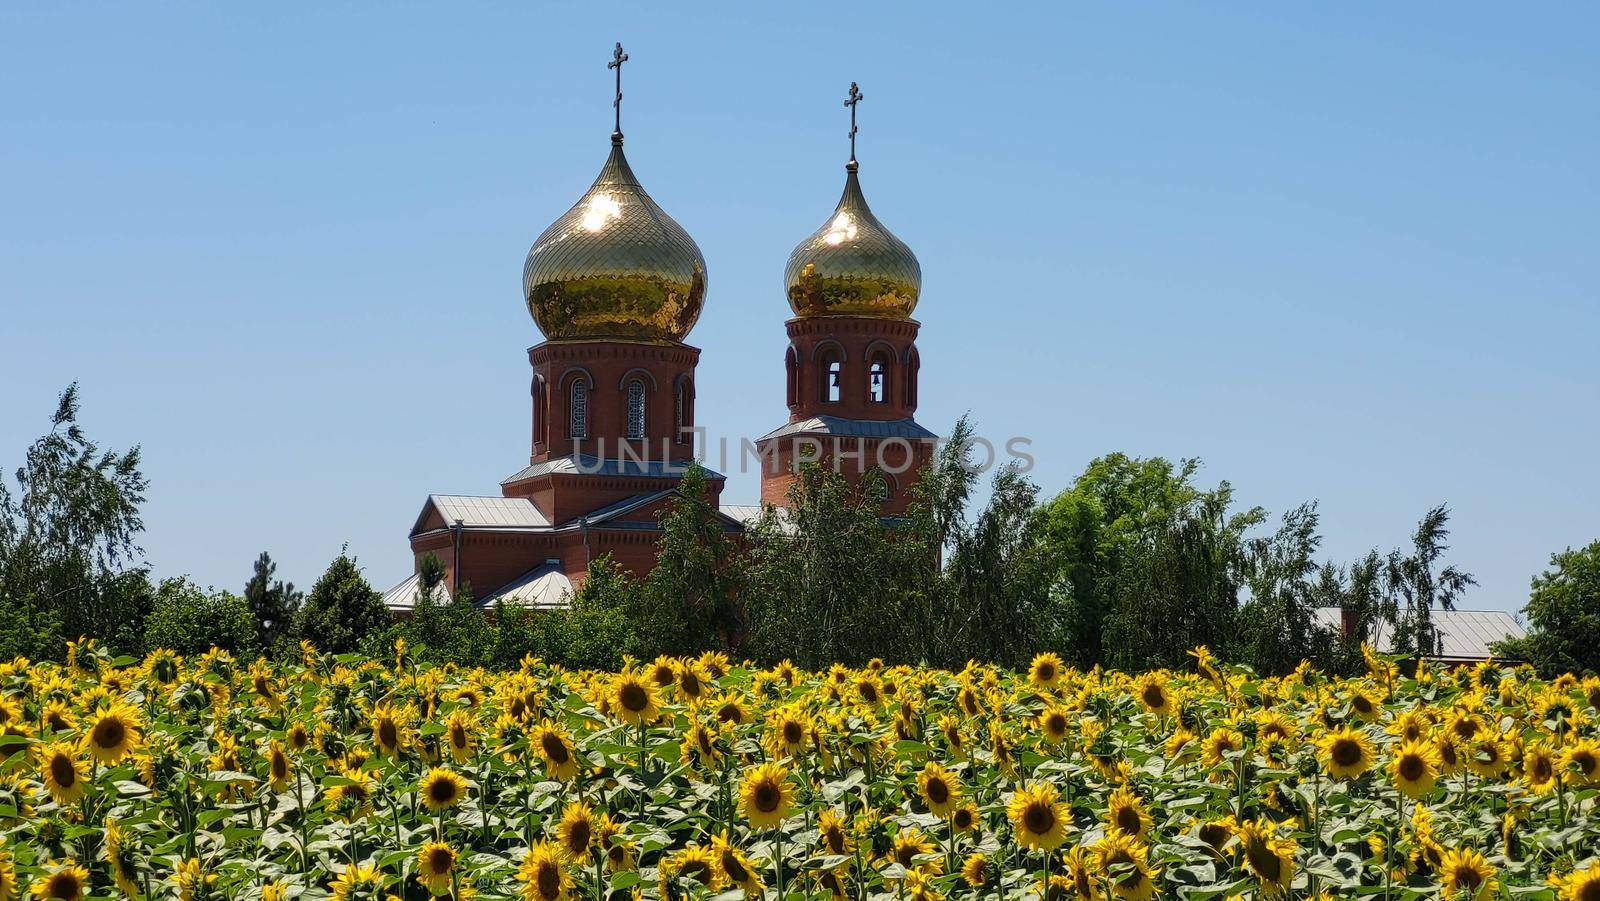 Orthodox church with golden domes in the middle of a field with sunflowers.